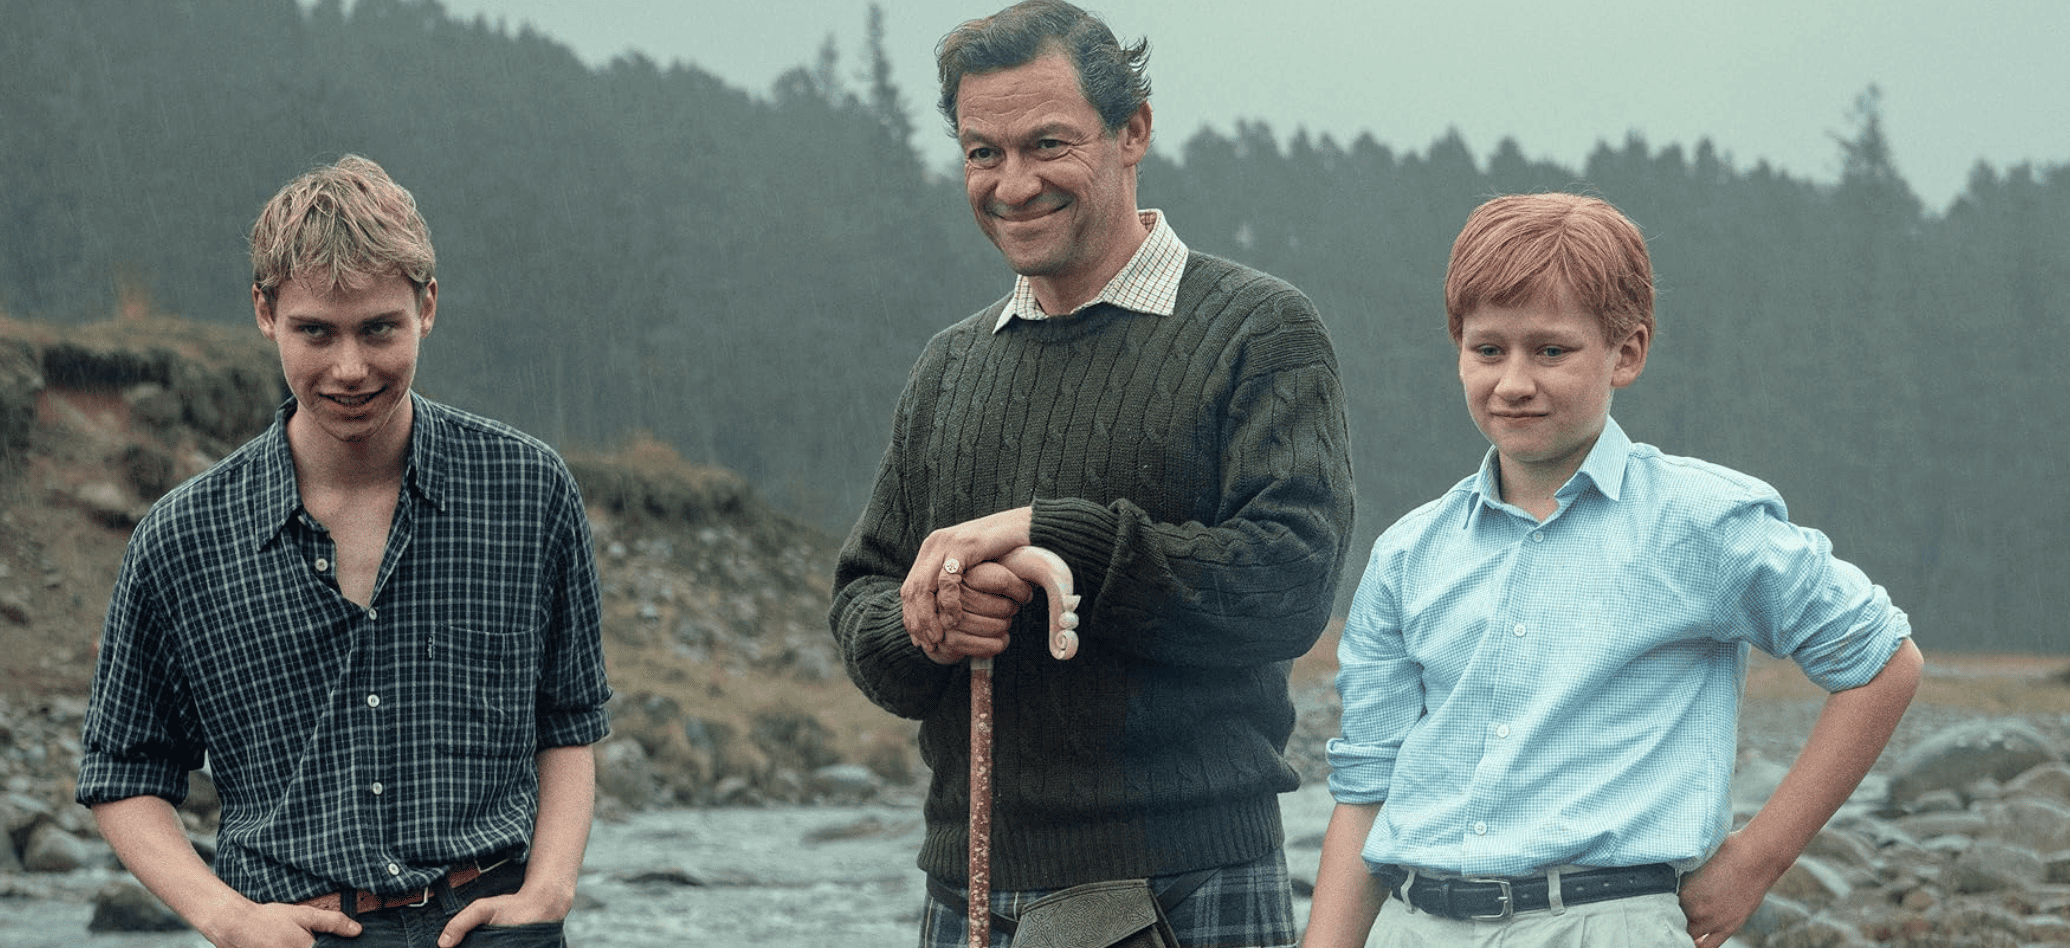 Two boys stand with an older man by a river in this image from Sony Pictures Television.